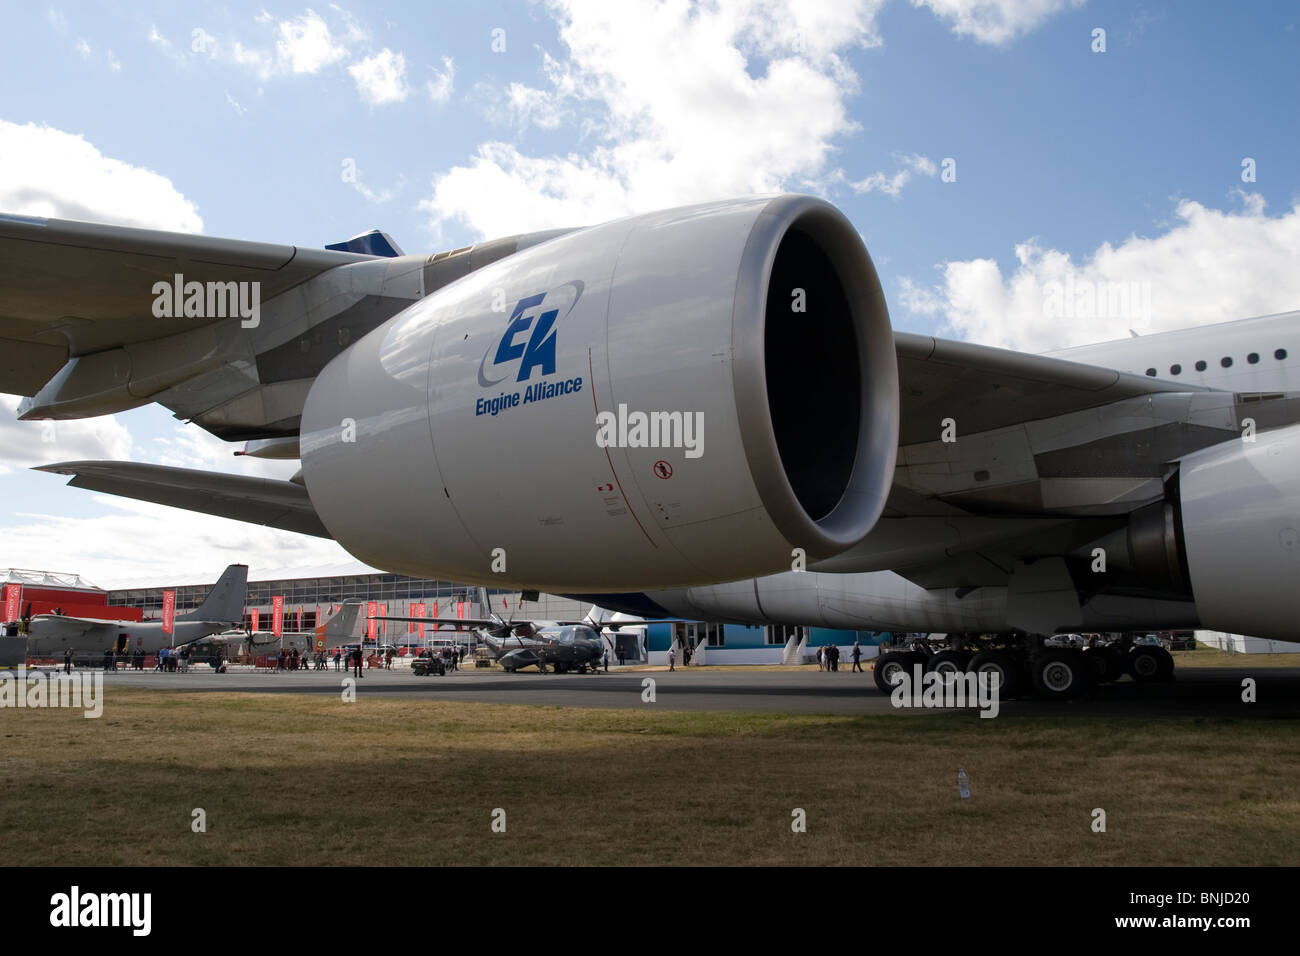 Cowling of Engine Alliance GP7200 Turbofan engine fitted to Airbus A380 at Farnborough International Air Show 2010 Great Britain Stock Photo